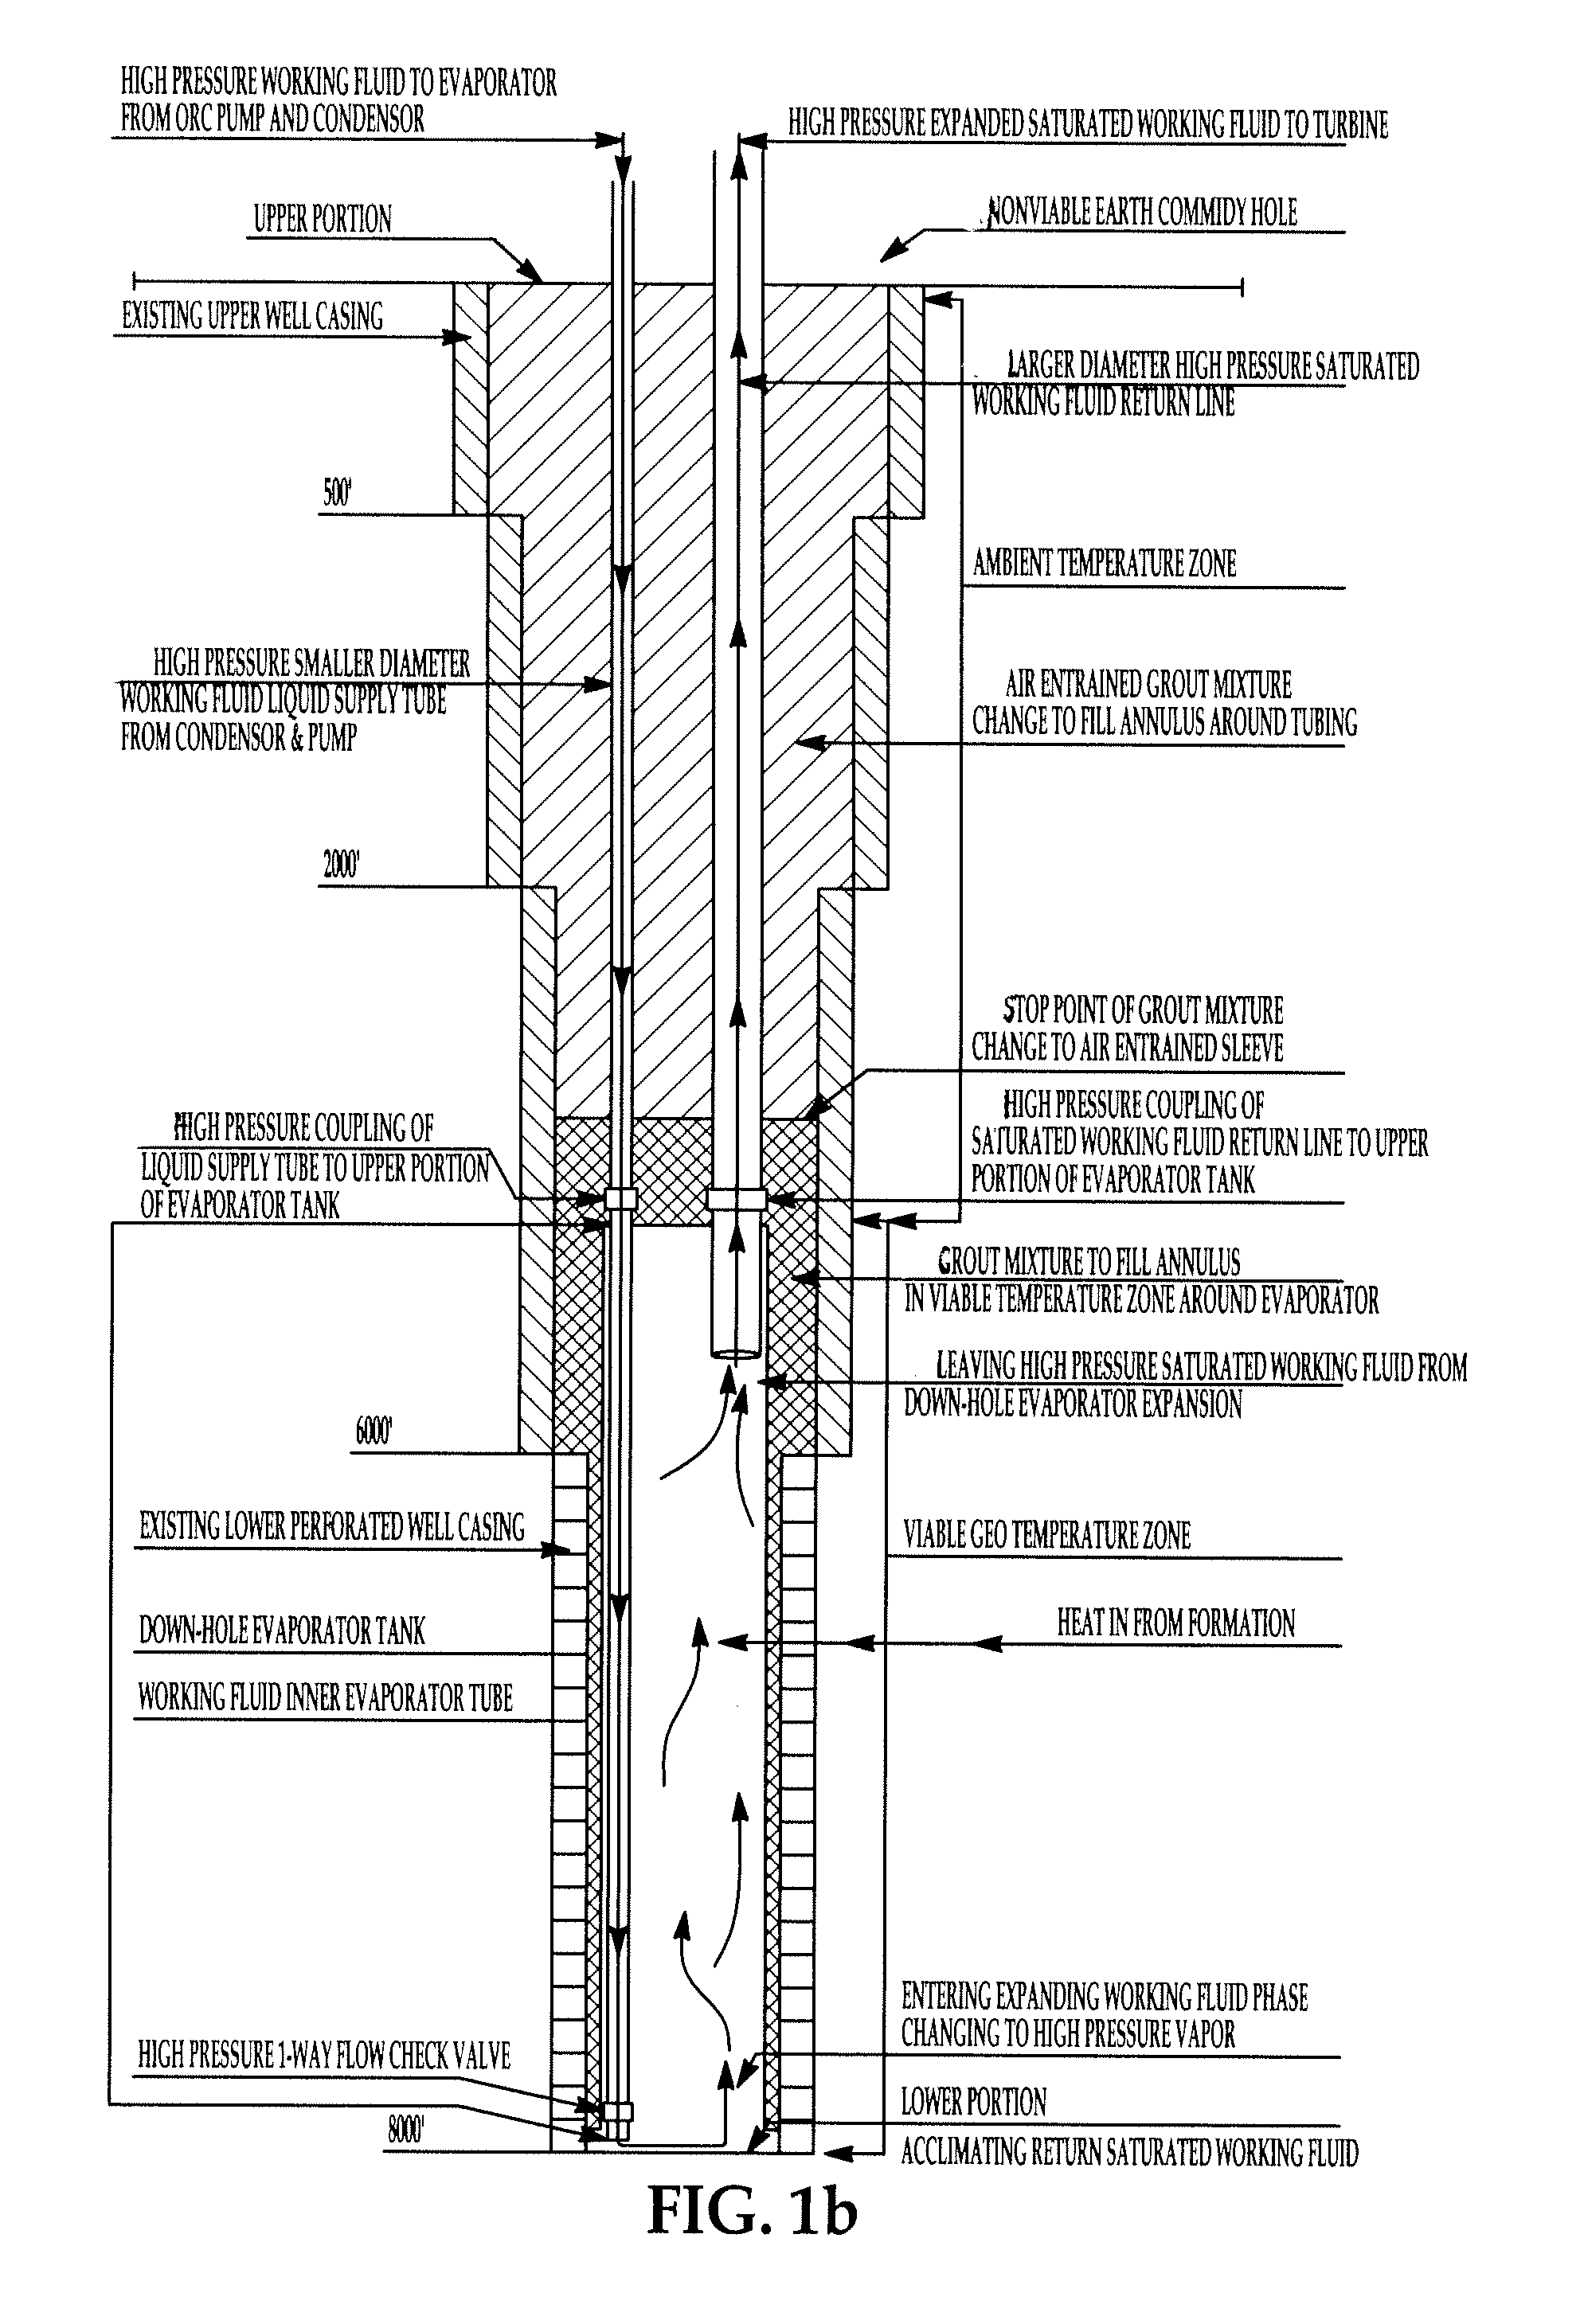 Methods and systems for hole reclamation for power generation via geo-saturation of secondary working fluids